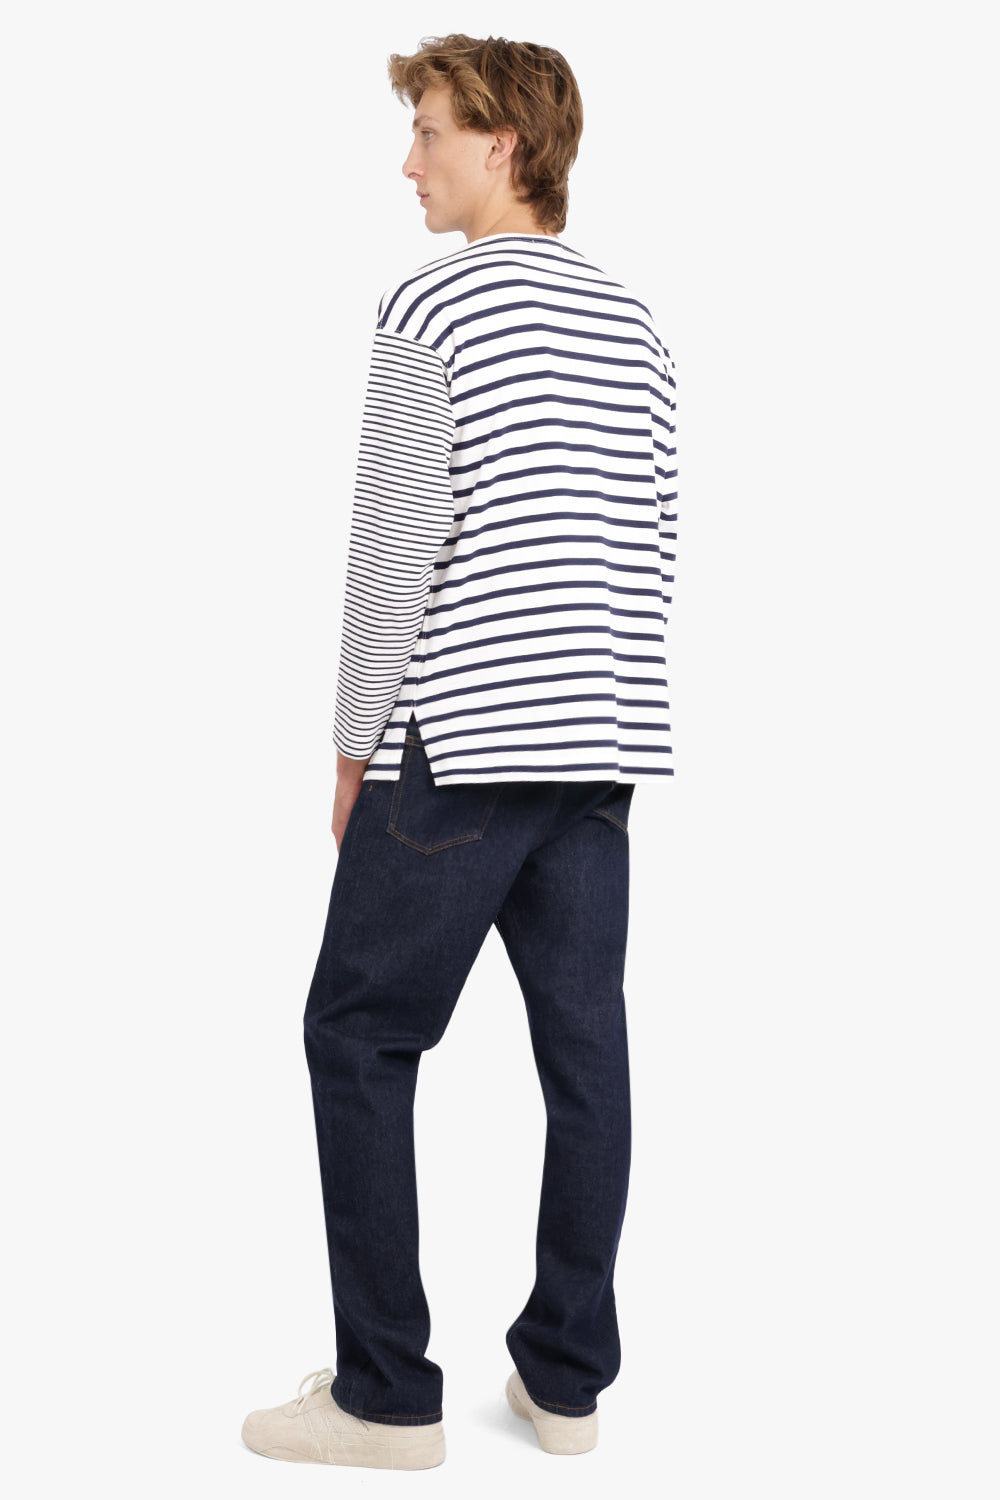 COMME DES GARCONS HOMME RTW Cotton Stitch Jersey with Horizontal Stripe | White/Navy